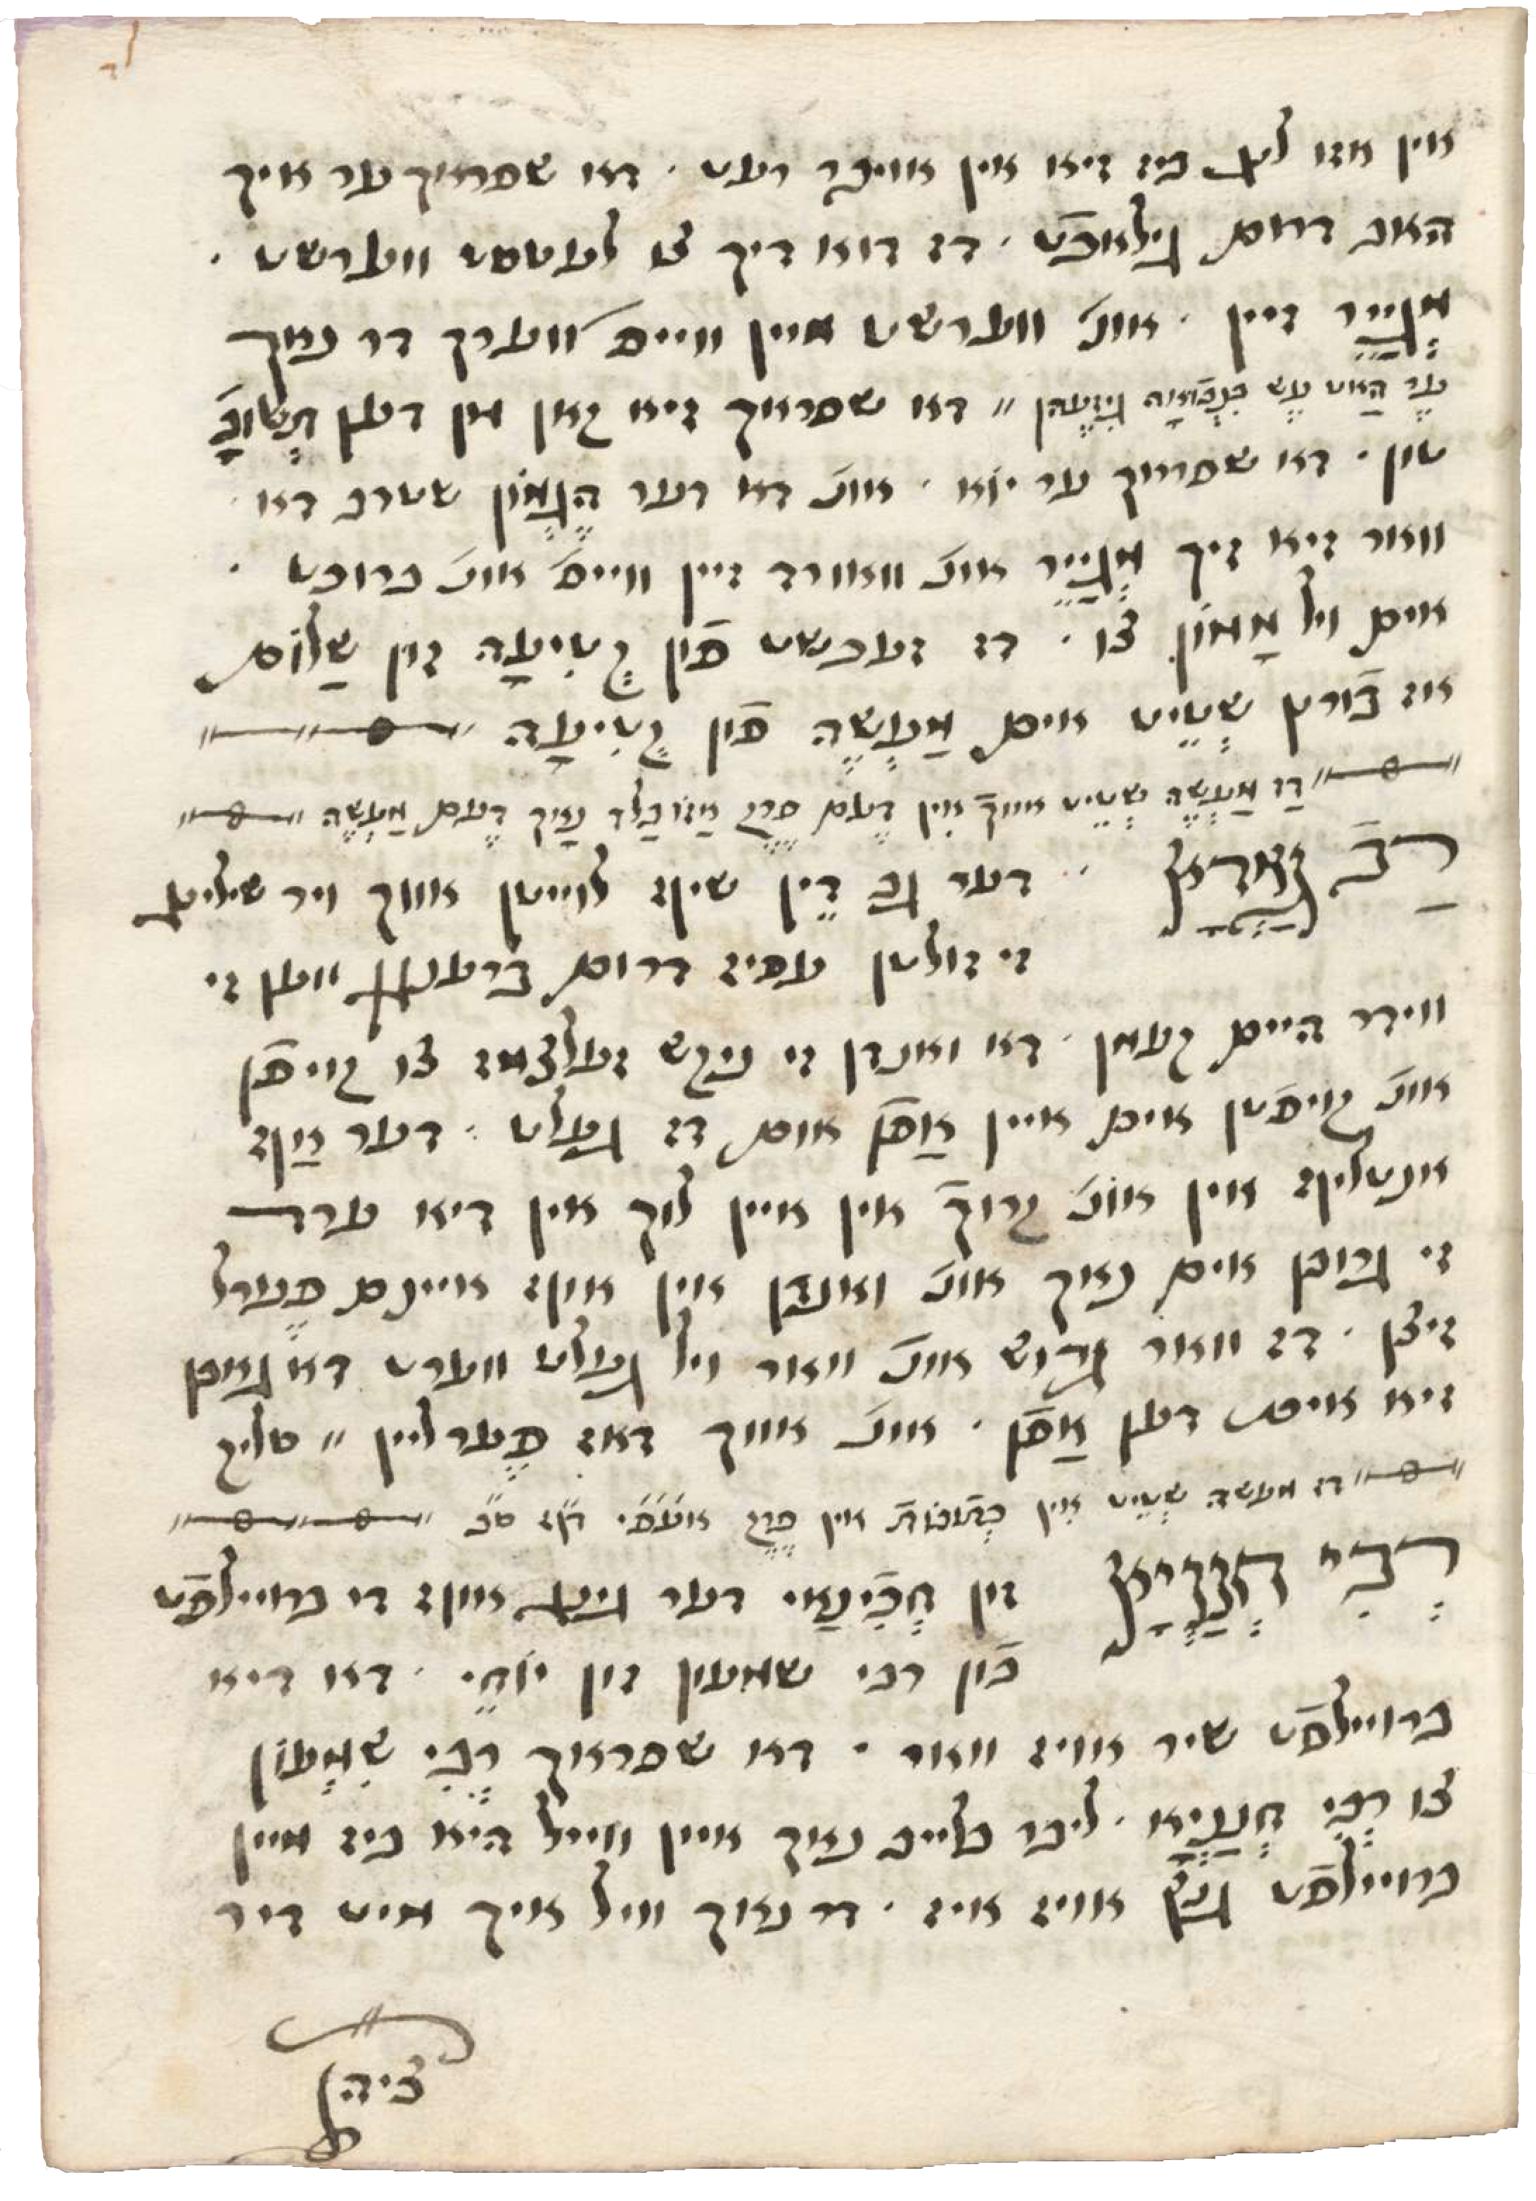 Single manuscript page with Yiddish text.